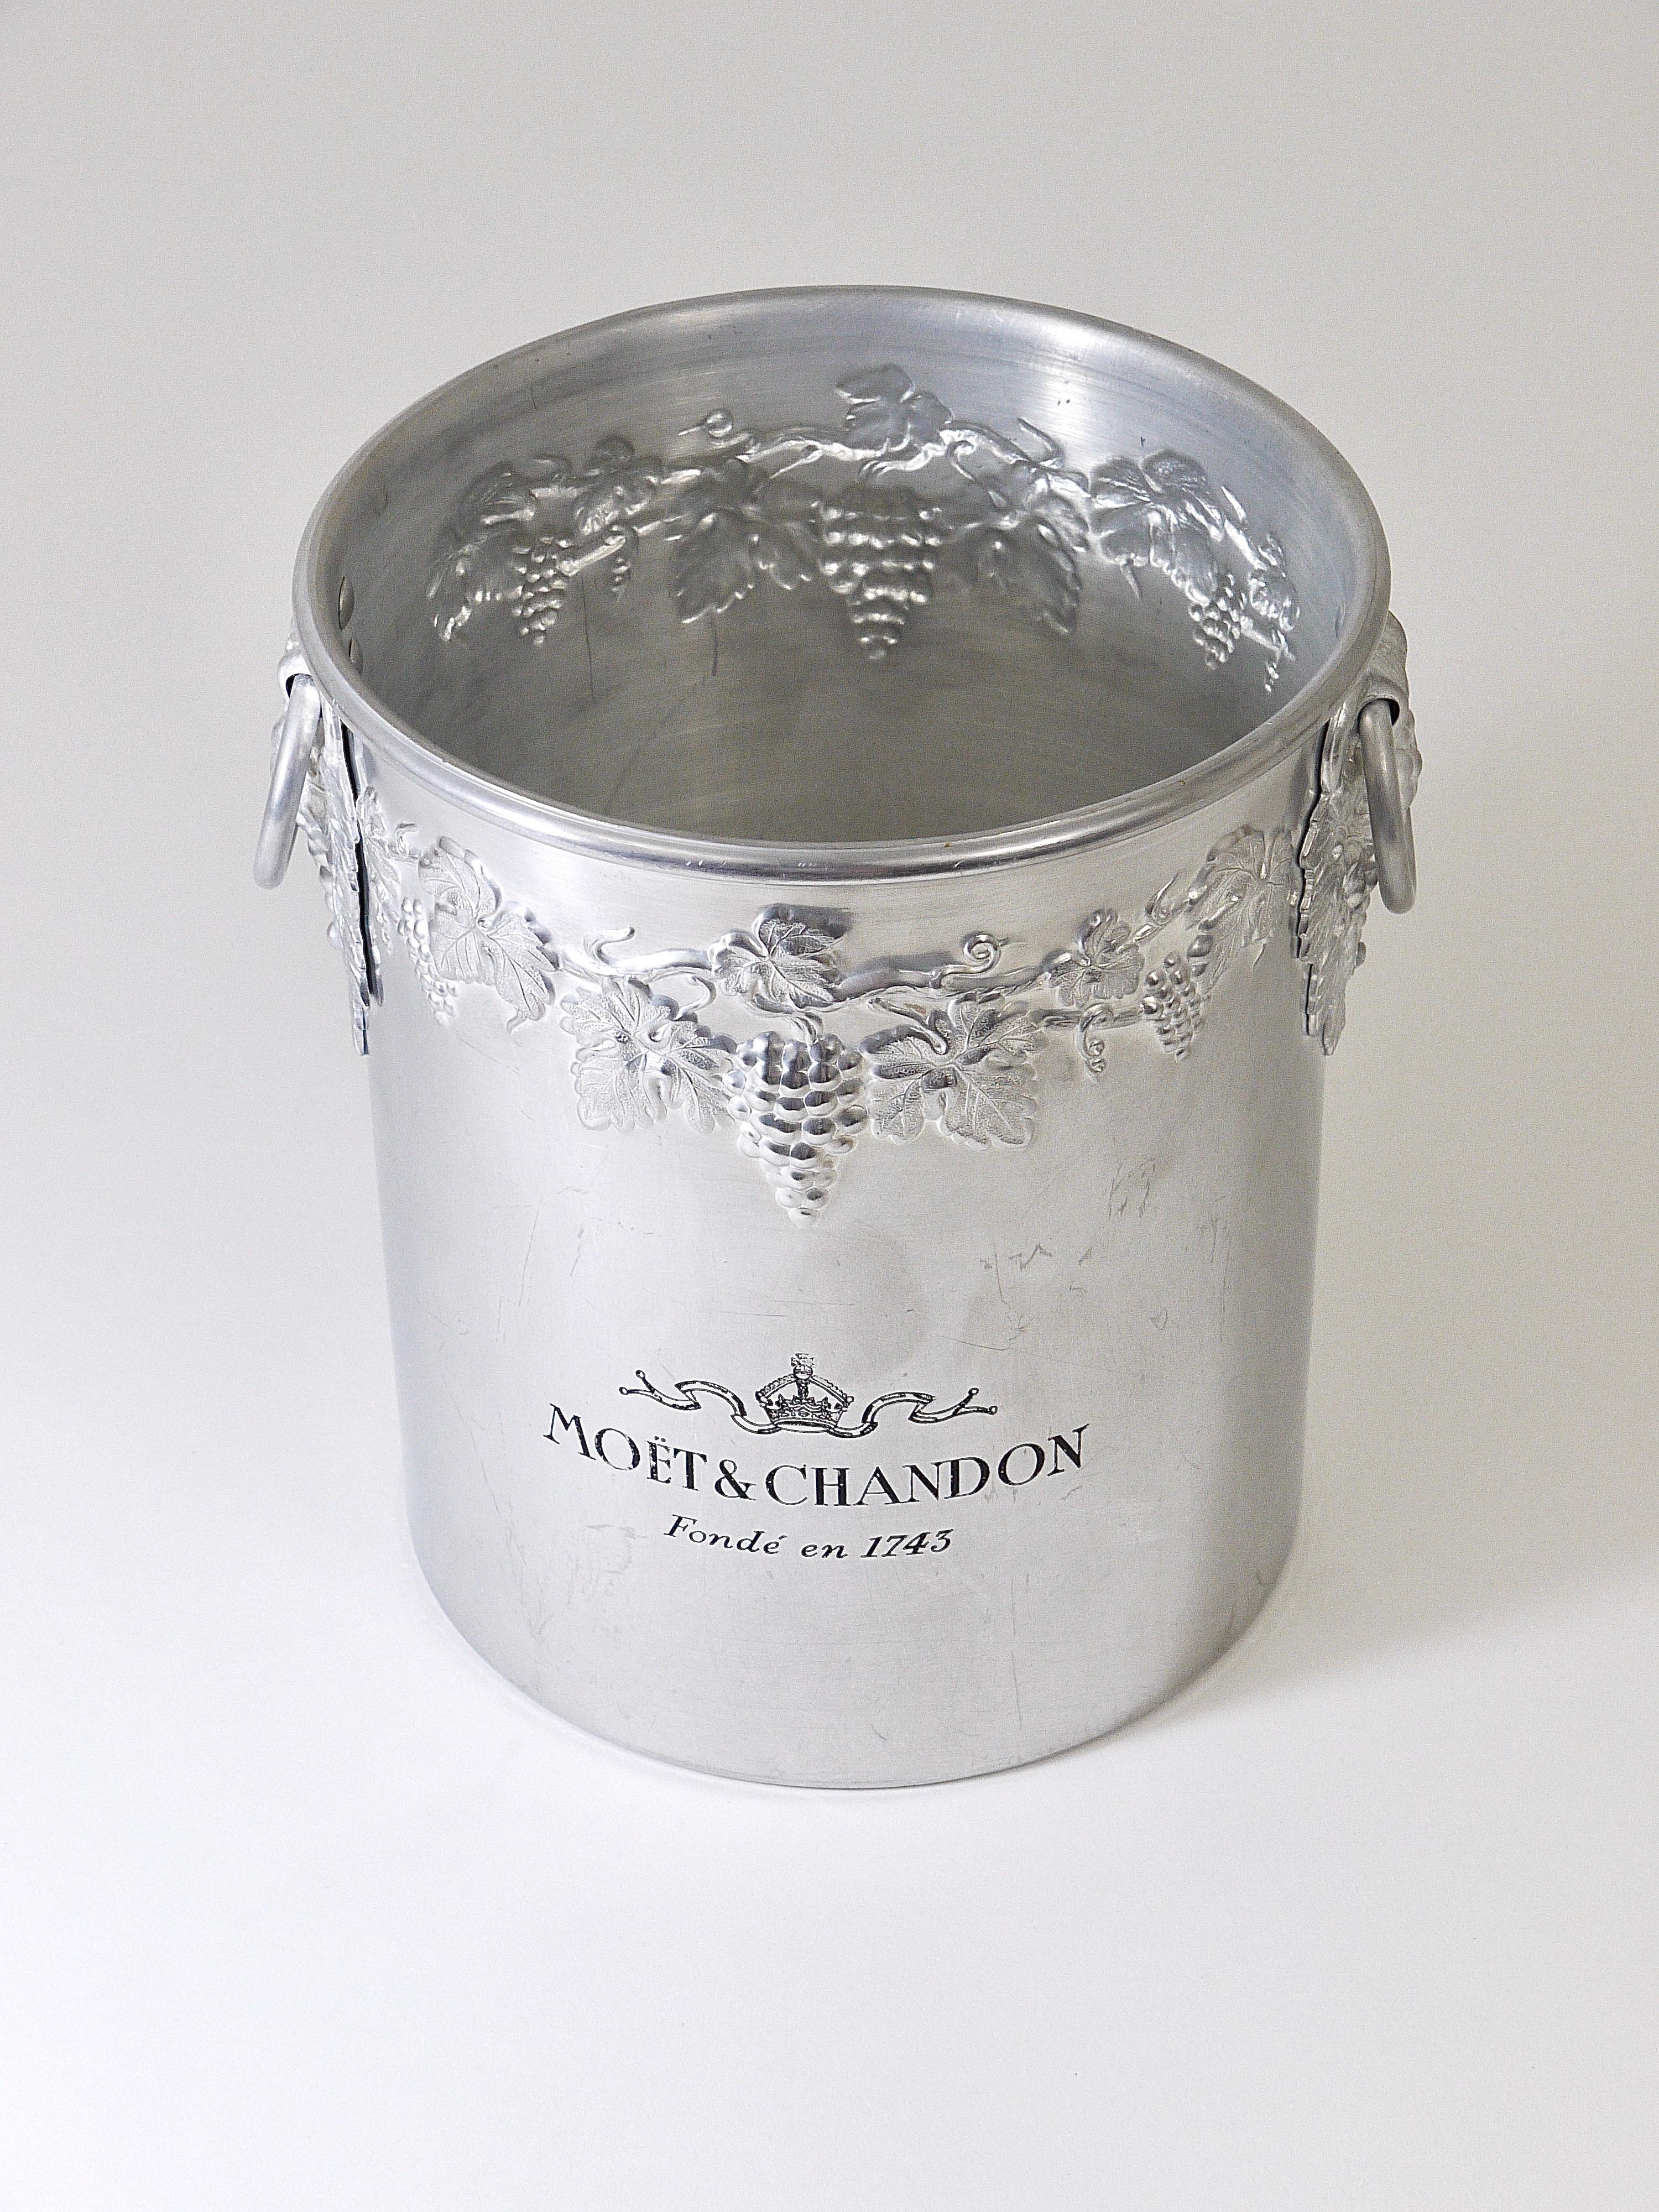 Moet & Chandon Champagne Ice Bucket Bottle Cooler from the 1970s, France 1